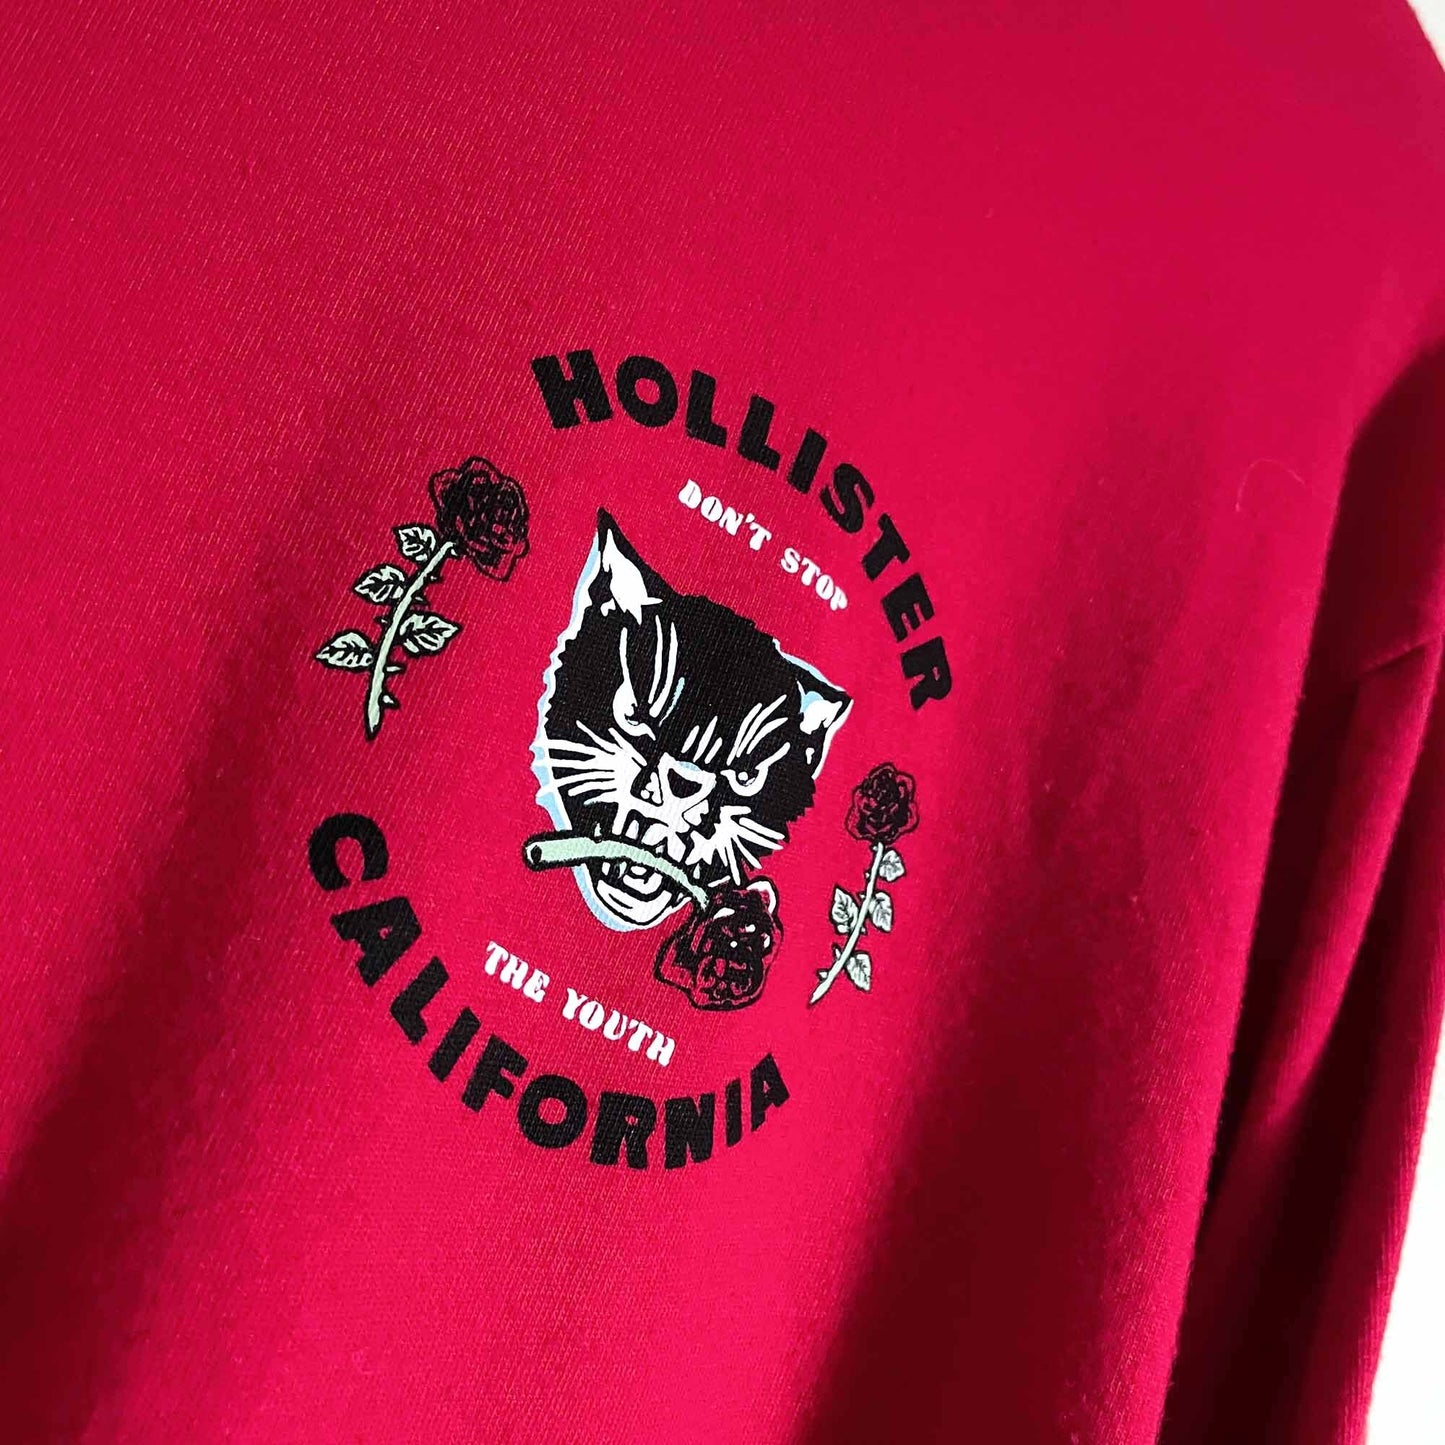 hollister don't stop the youth long sleeve tee - size large